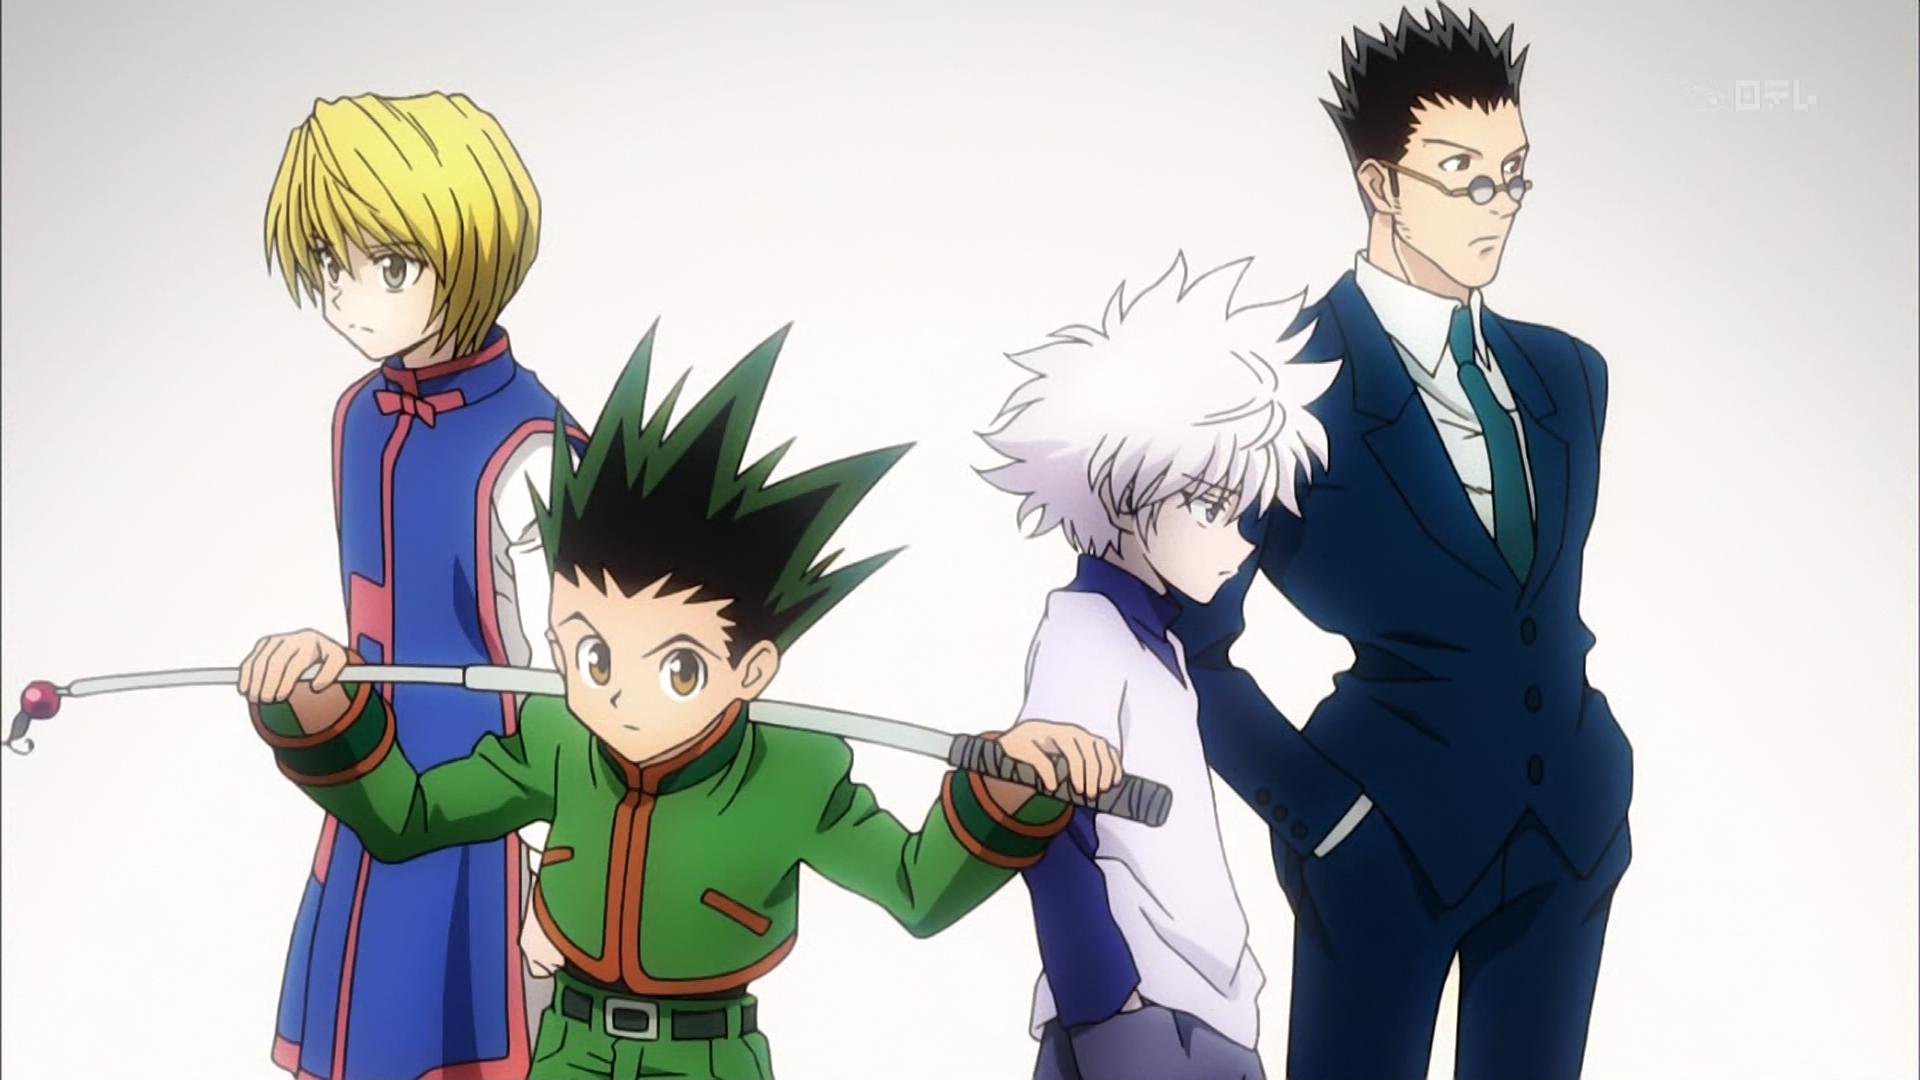 Wallpapers for hunter x hunter APK for Android Download